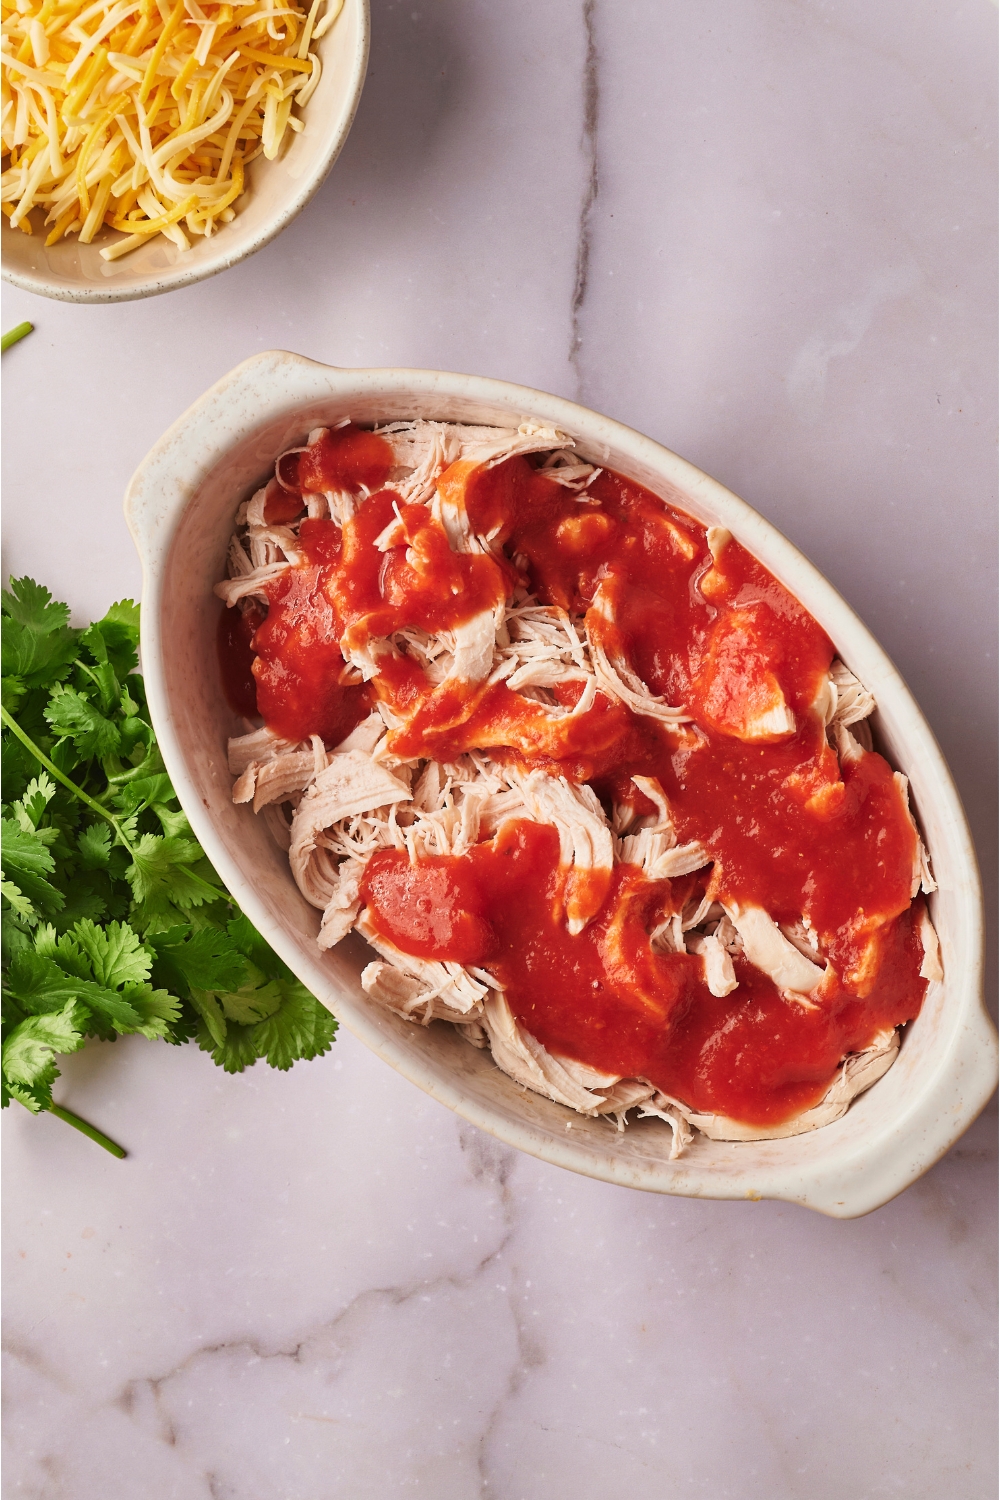 A white casserole dish filled with shredded chicken and red sauce.